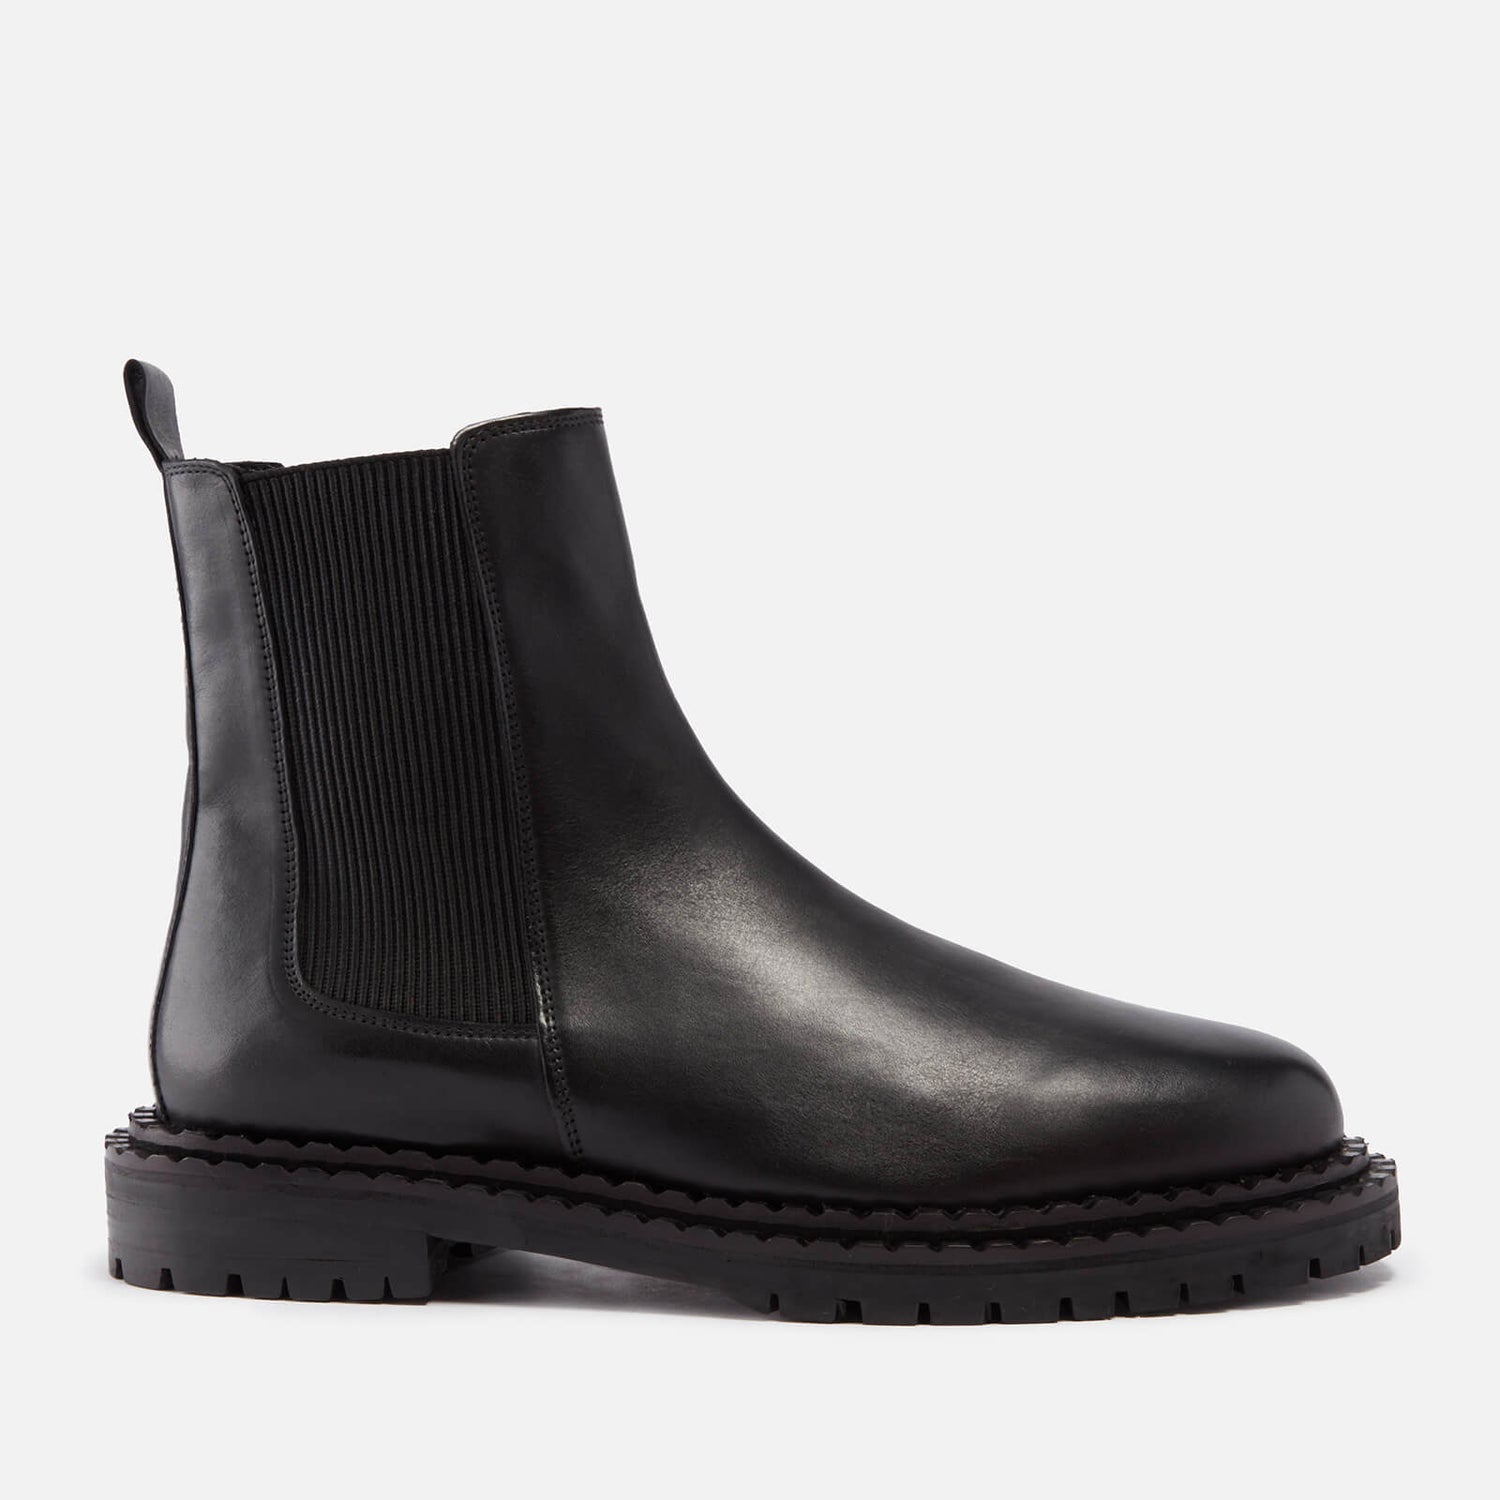 Walk London Jagger Leather Chelsea Boots - 7